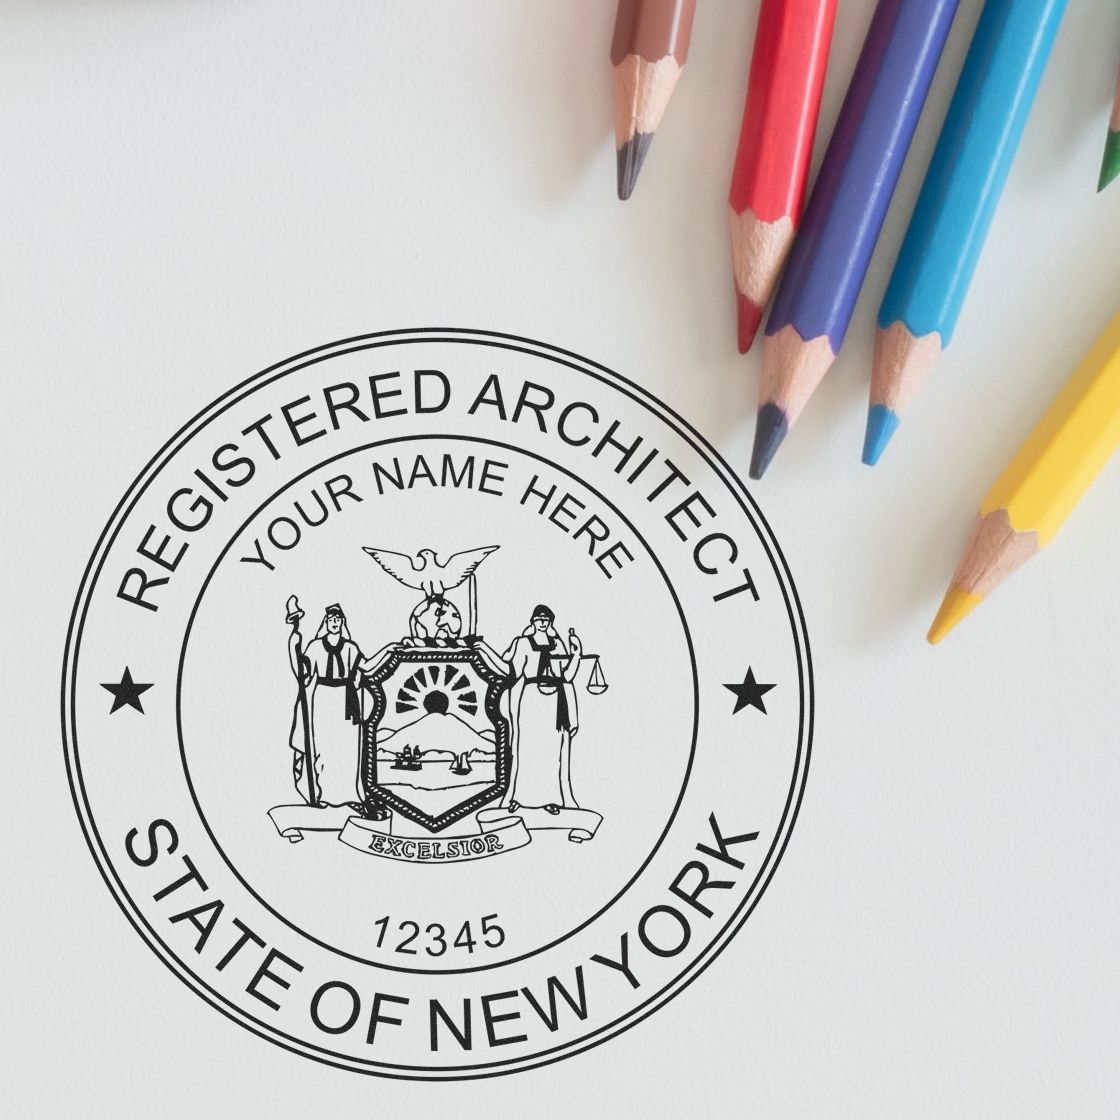 The New York Architect Seal: Understanding the Stamp Requirements Feature Post Image